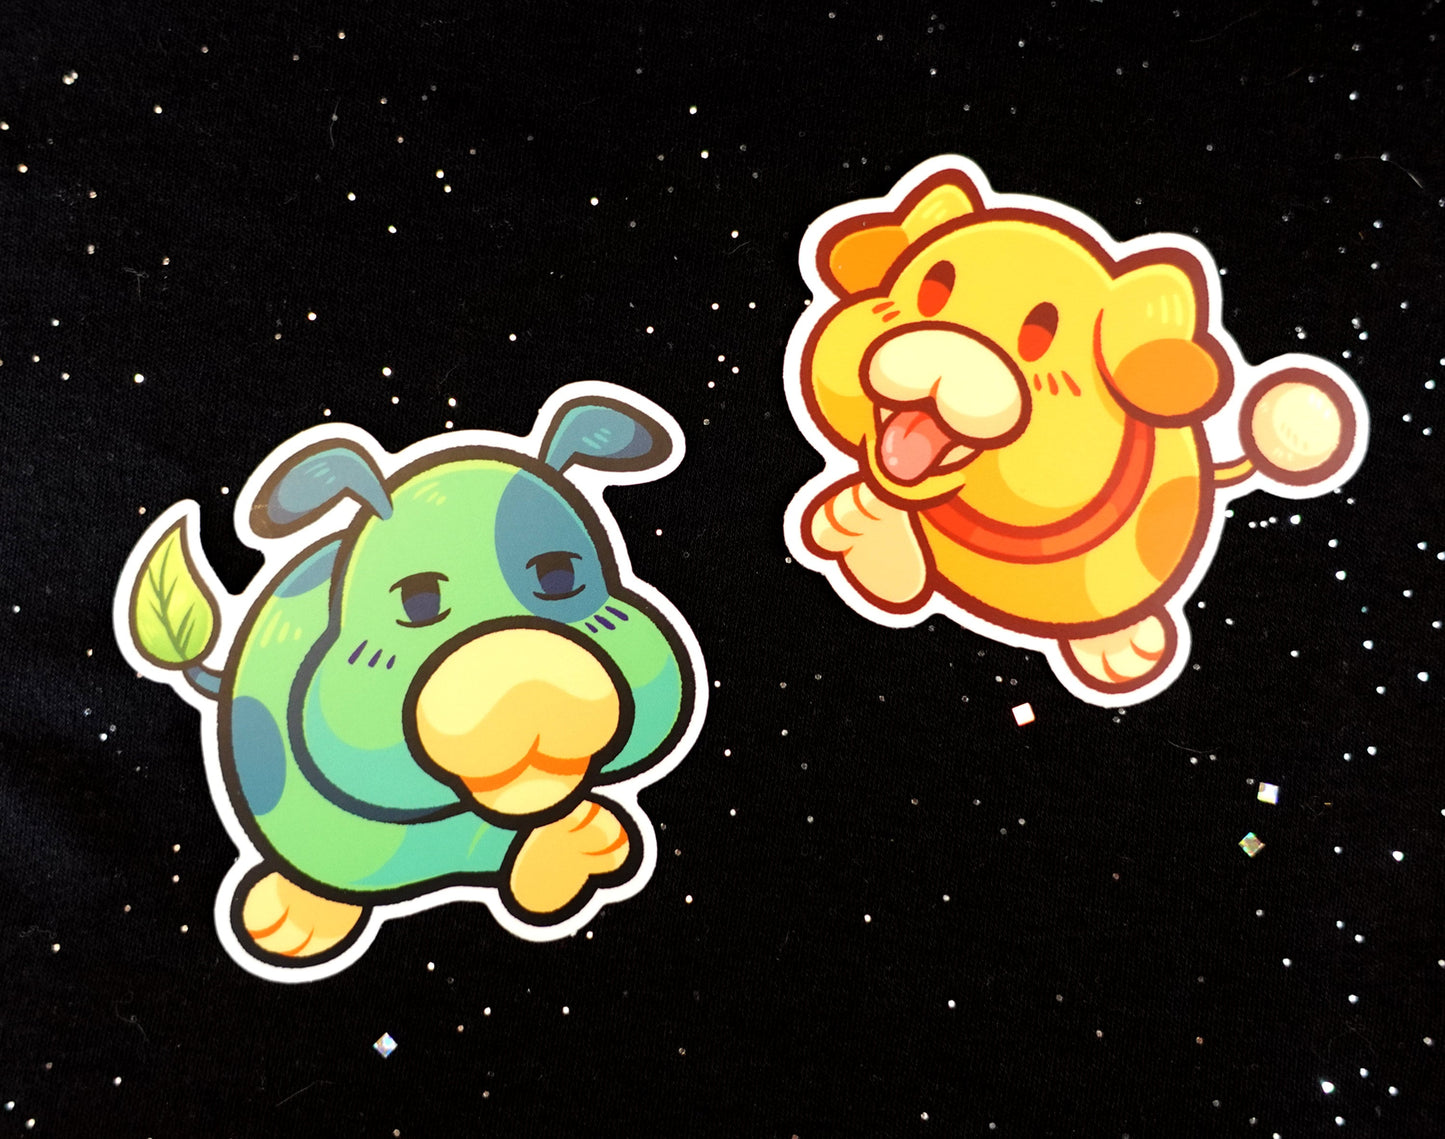 Moss and Oatchi Stickers